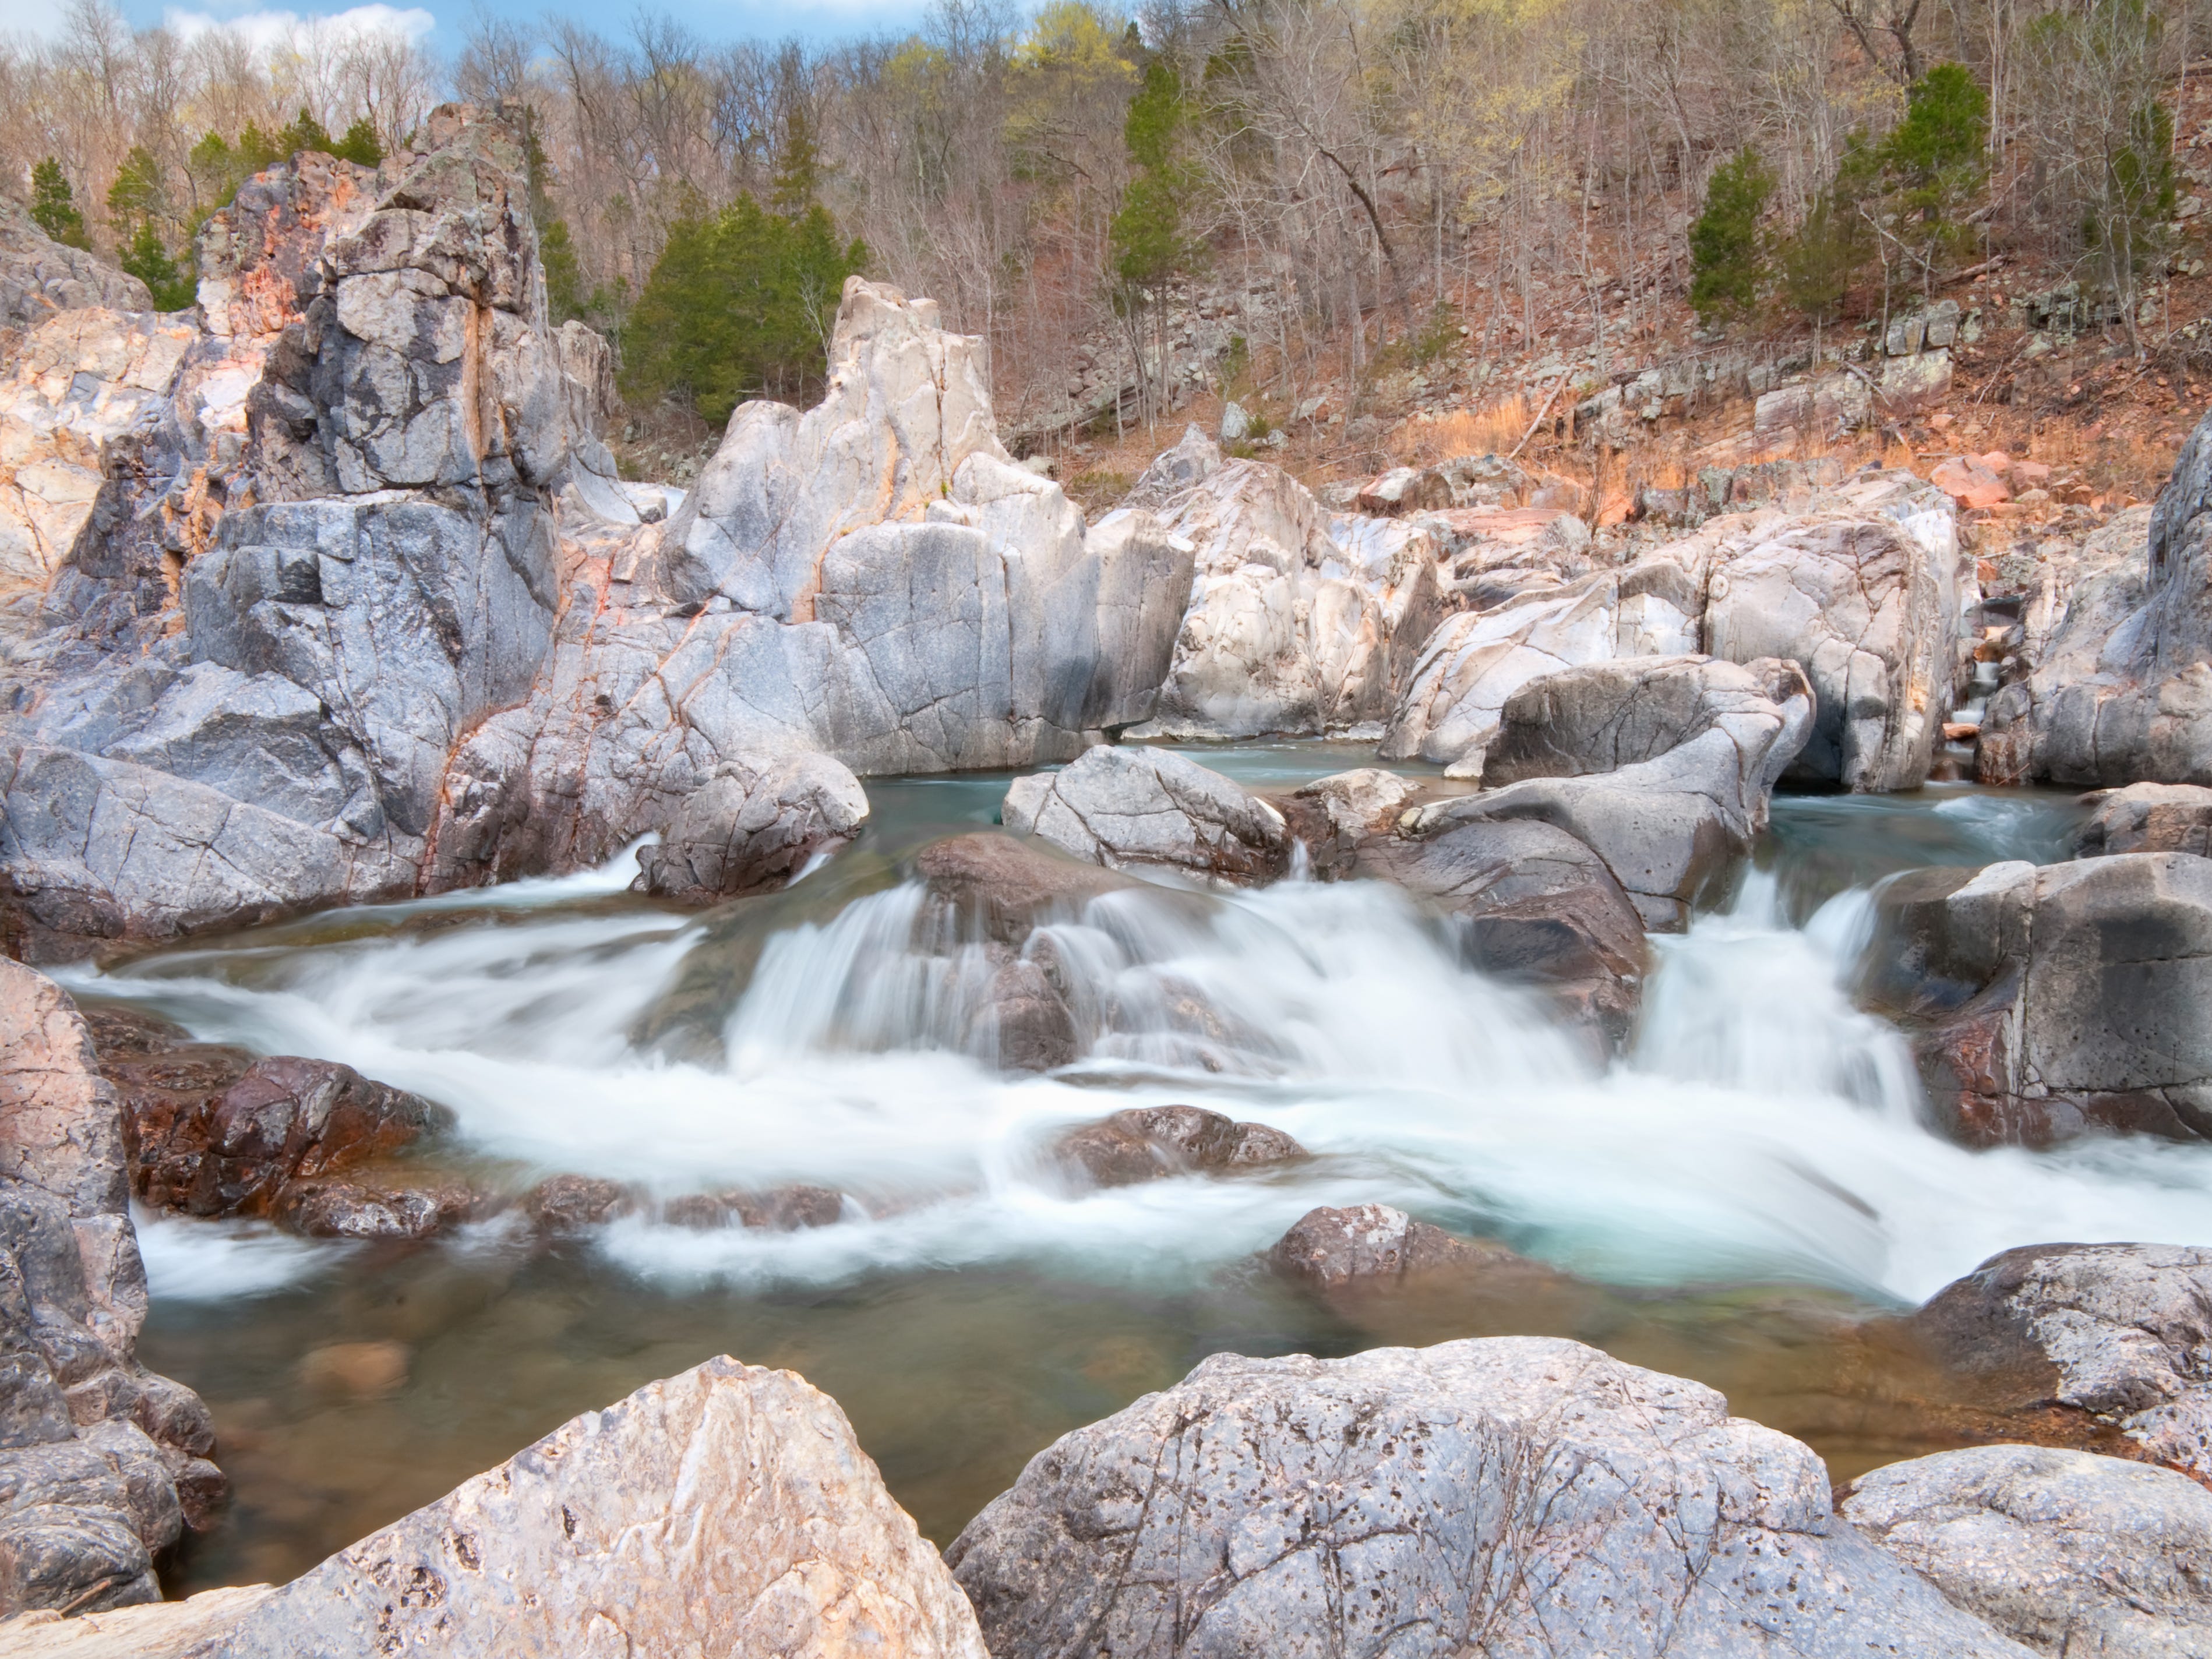 <p>The shut-ins are a series of mild river rapids and <a href="https://nature.mdc.mo.gov/discover-nature/places/johnsons-shut-ins">igneous rocks</a> leftover from volcanic activity billions of years ago. It was named the best state park for camping and RVing in 2022 by <a href="https://www.10best.com/interests/outdoor-adventures/10-best-state-parks-camping-rving-readers-choice-awards-2022/">USA Today</a>.</p>